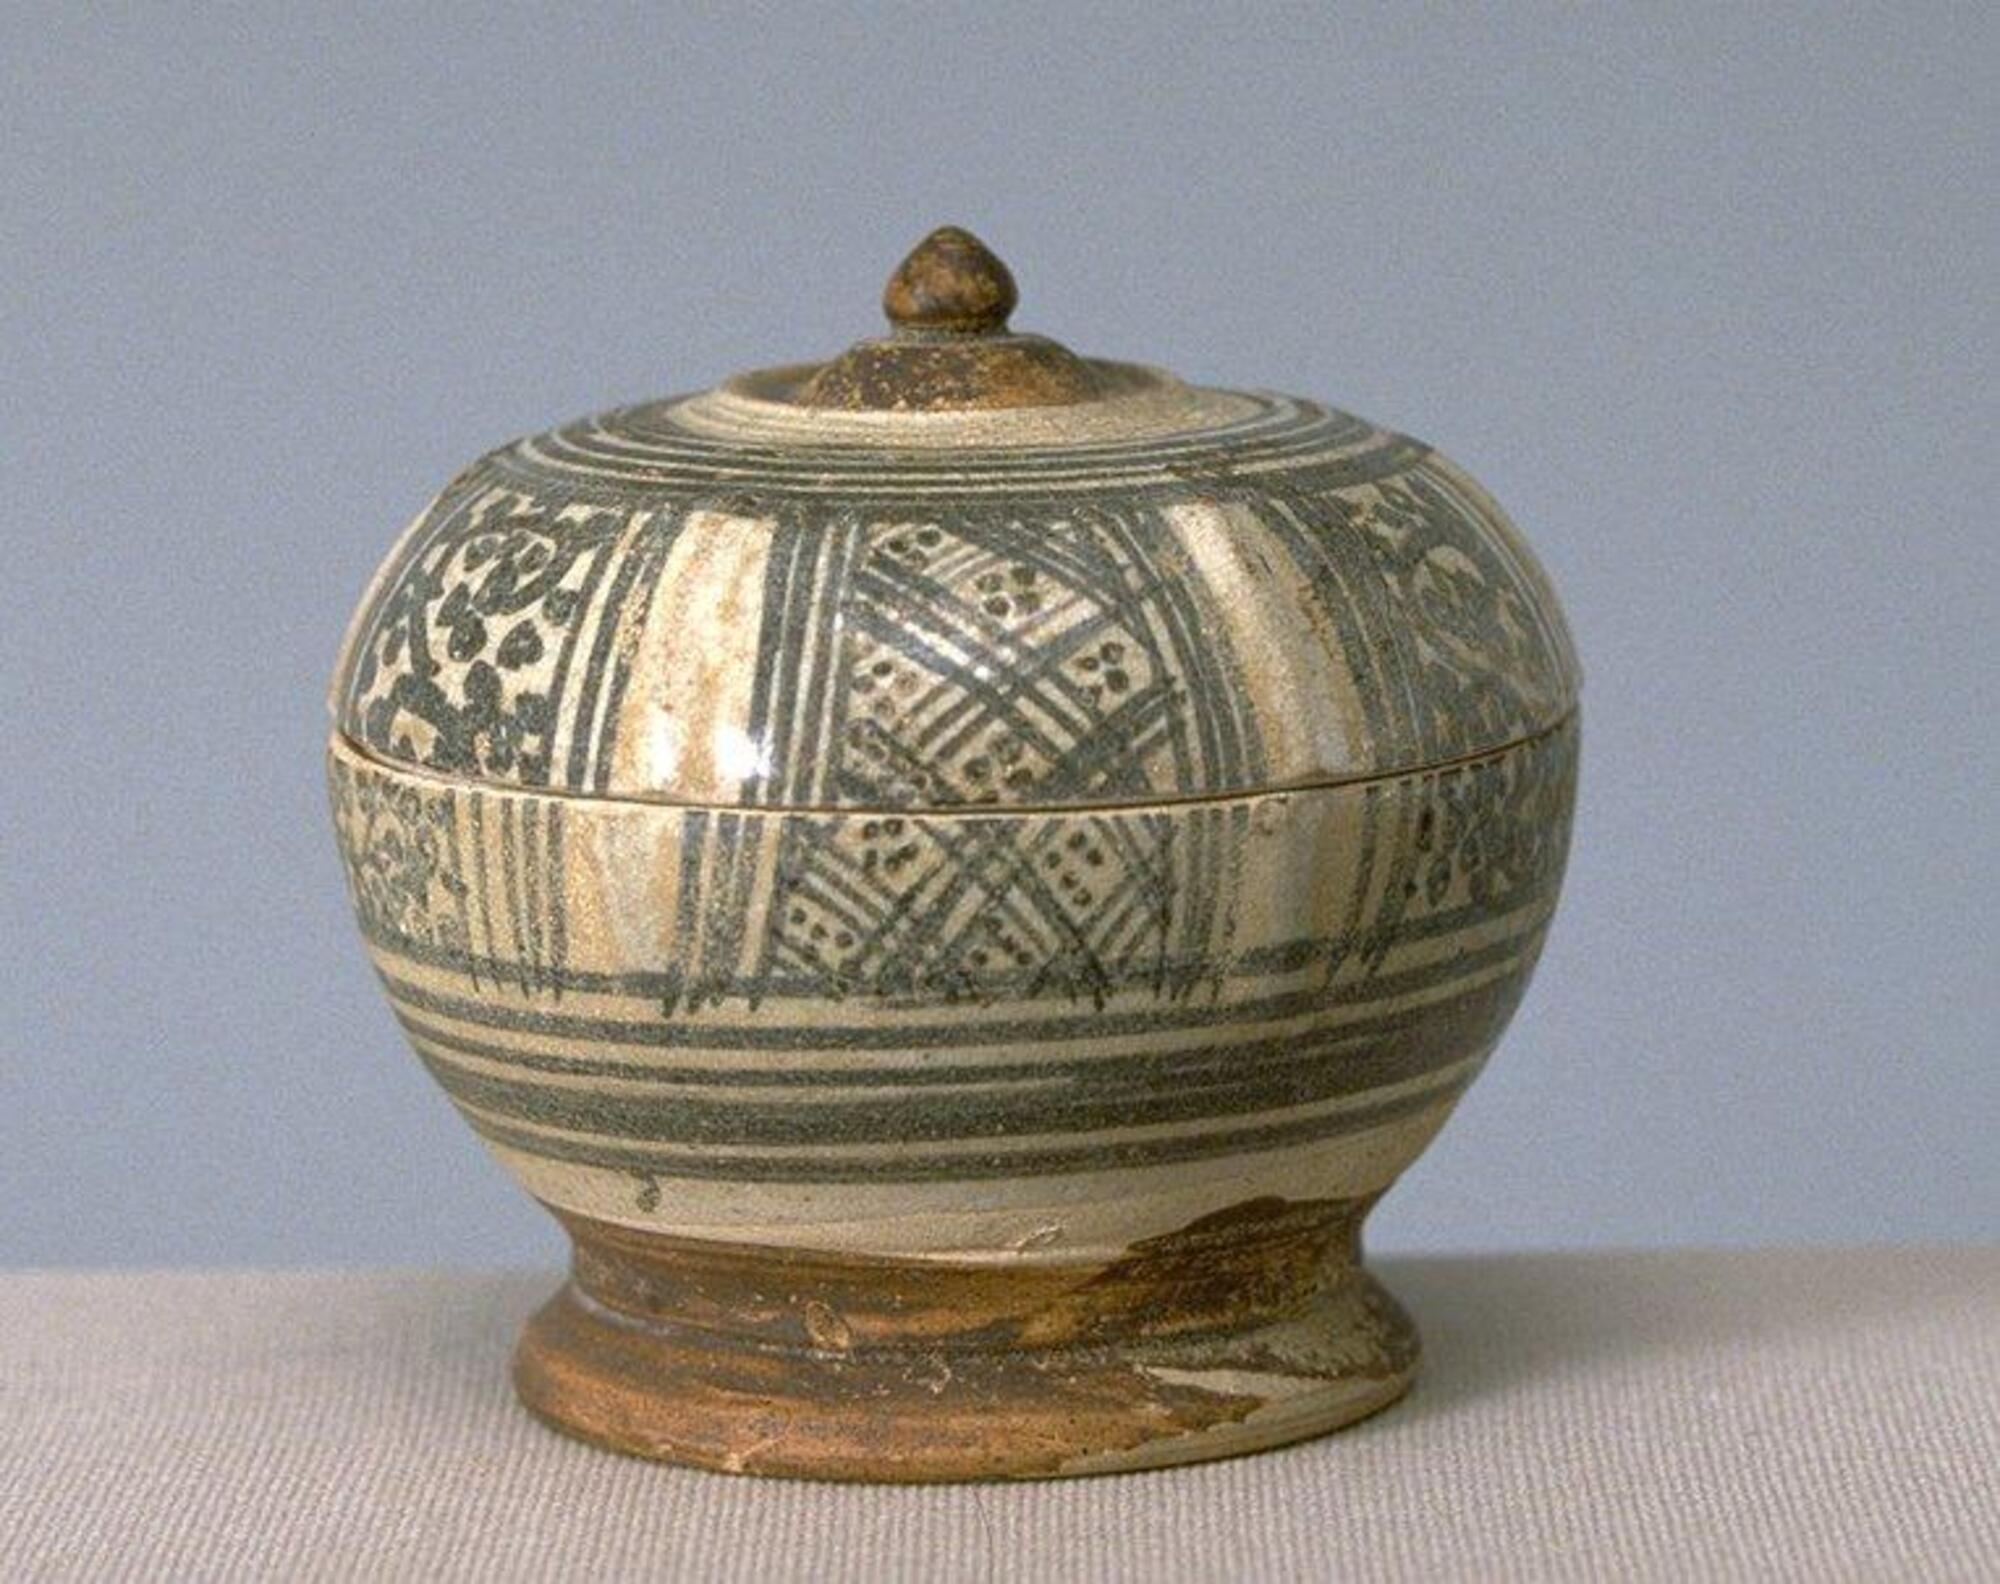 Small-size covered box, the lotus bud handle and surrounding medallion in brown, the body and lid with alternating panels of vegetal scrolls and lattices. Each panel is separated by a raised line. The foot is painted brown. Clear glaze.